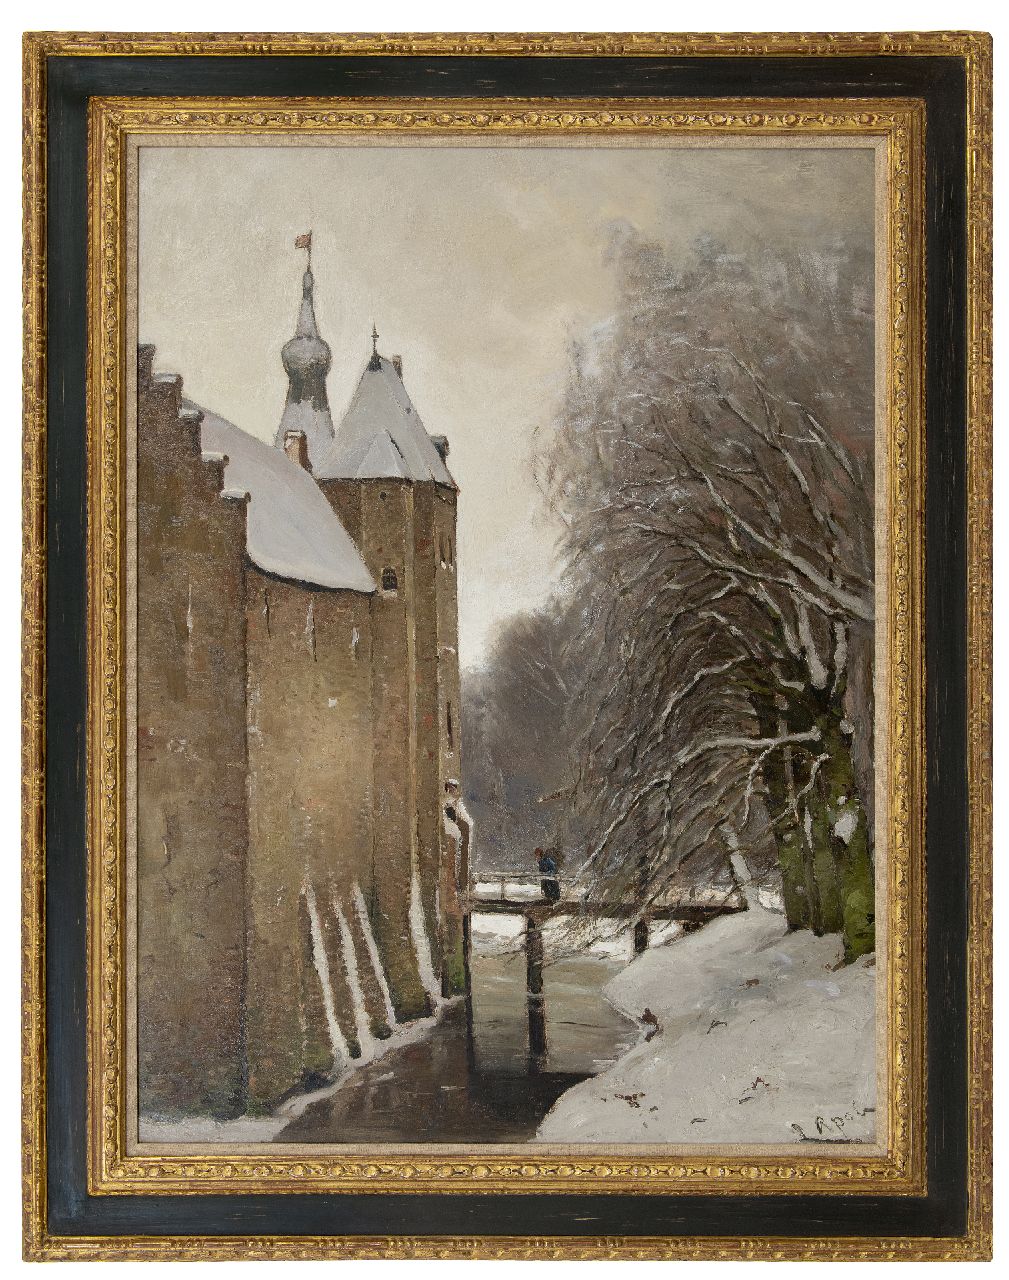 Apol L.F.H.  | Lodewijk Franciscus Hendrik 'Louis' Apol | Paintings offered for sale | The castle of Doorwerth in winter, oil on canvas 108.2 x 81.2 cm, signed l.r.